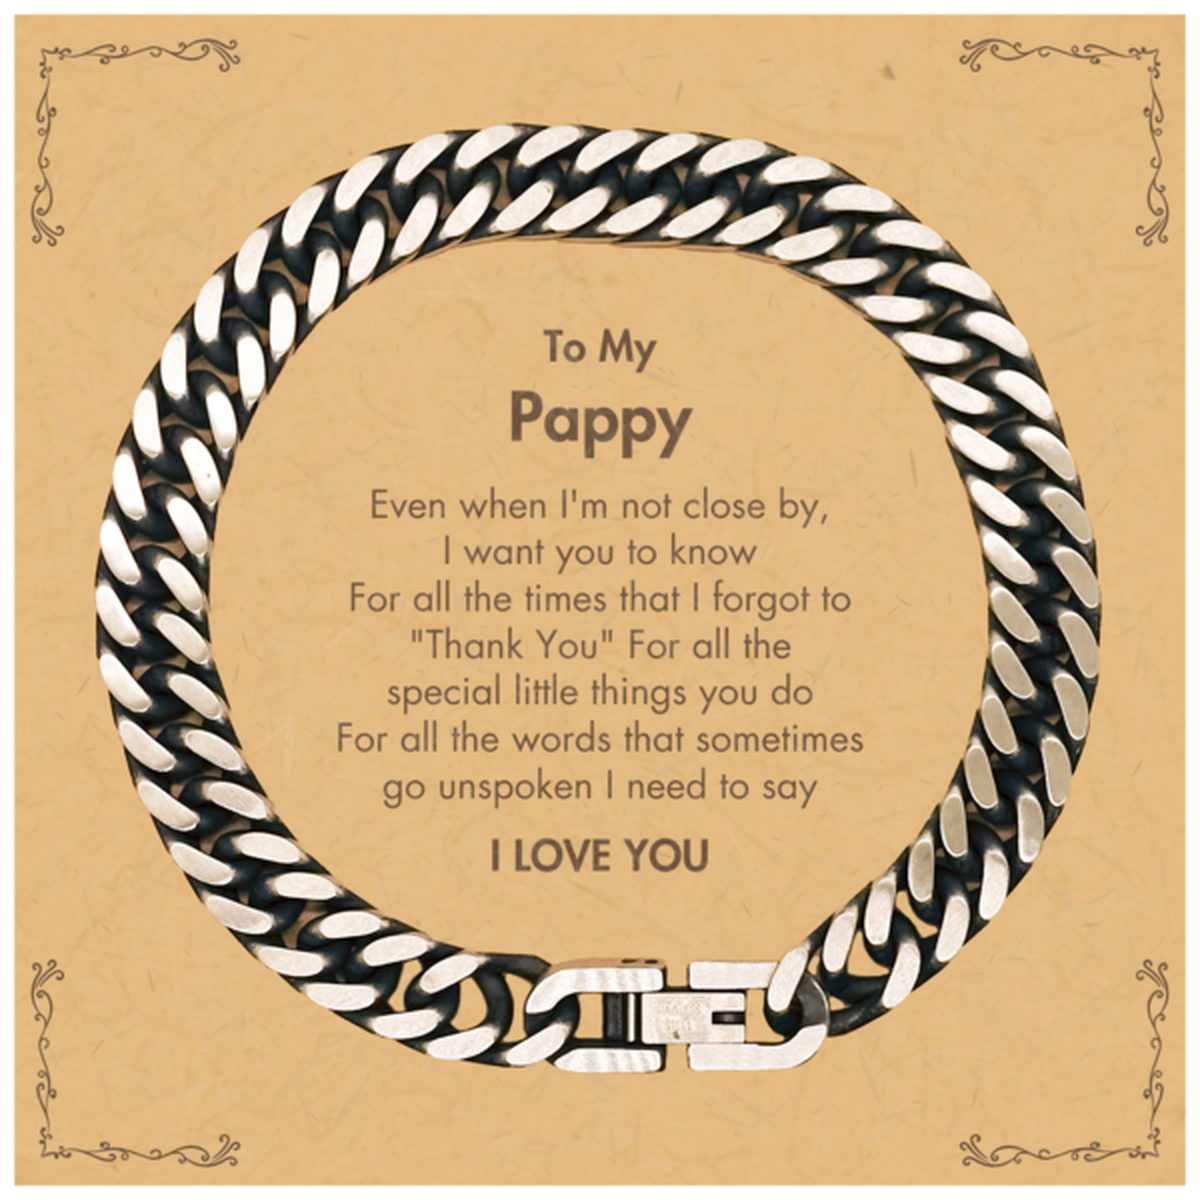 Thank You Gifts for Pappy, Keepsake Cuban Link Chain Bracelet Gifts for Pappy Birthday Mother's day Father's Day Pappy For all the words That sometimes go unspoken I need to say I LOVE YOU